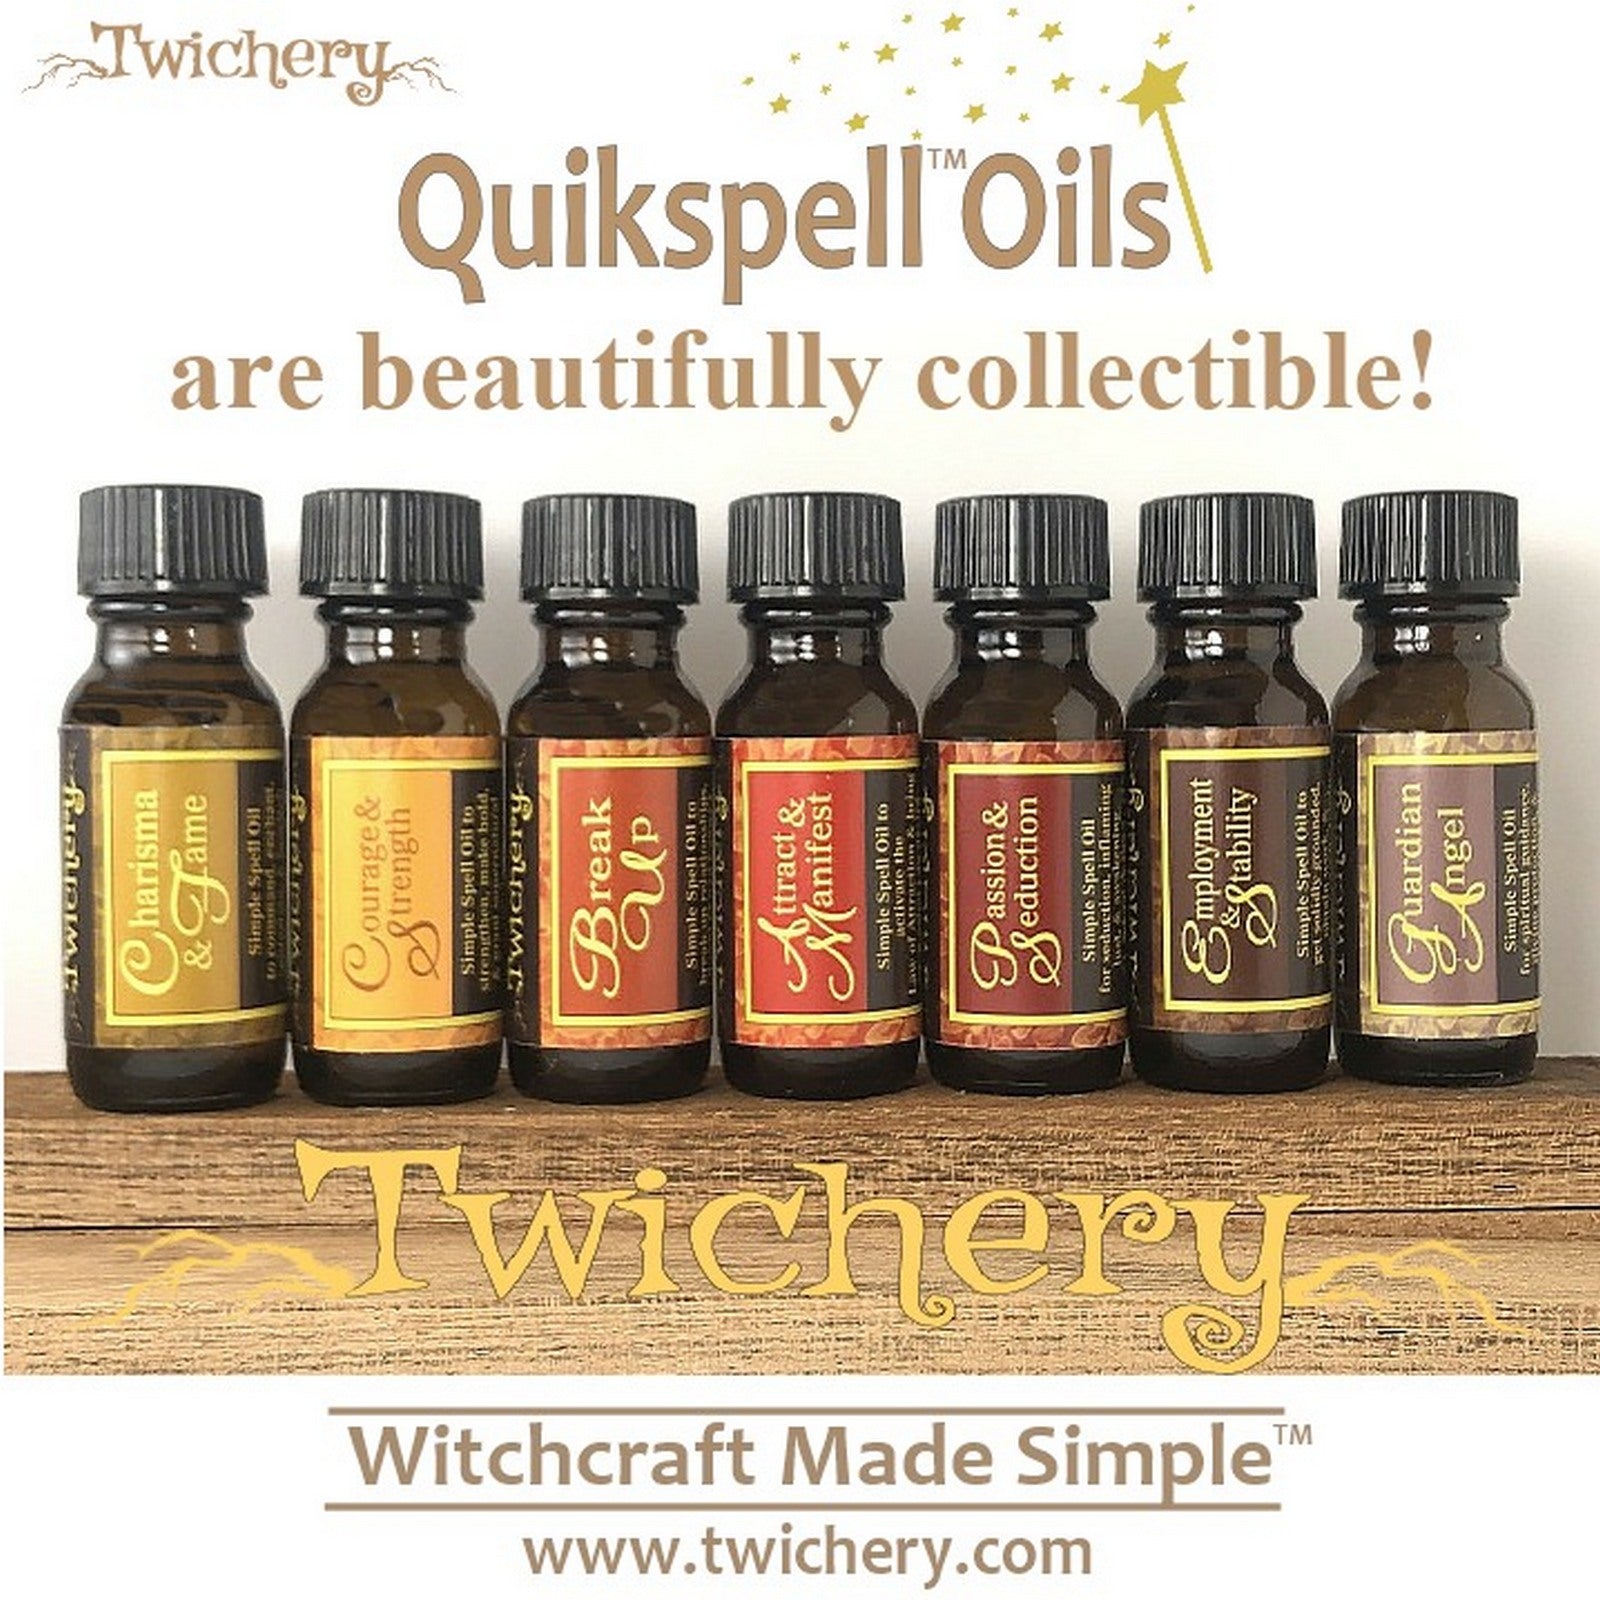 Collect all 24 Twichery Quikspell Oils for all your magickal needs, including grounding after spiritual work. Hoodoo, Voodoo, Wicca, Witchcraft Made Simple